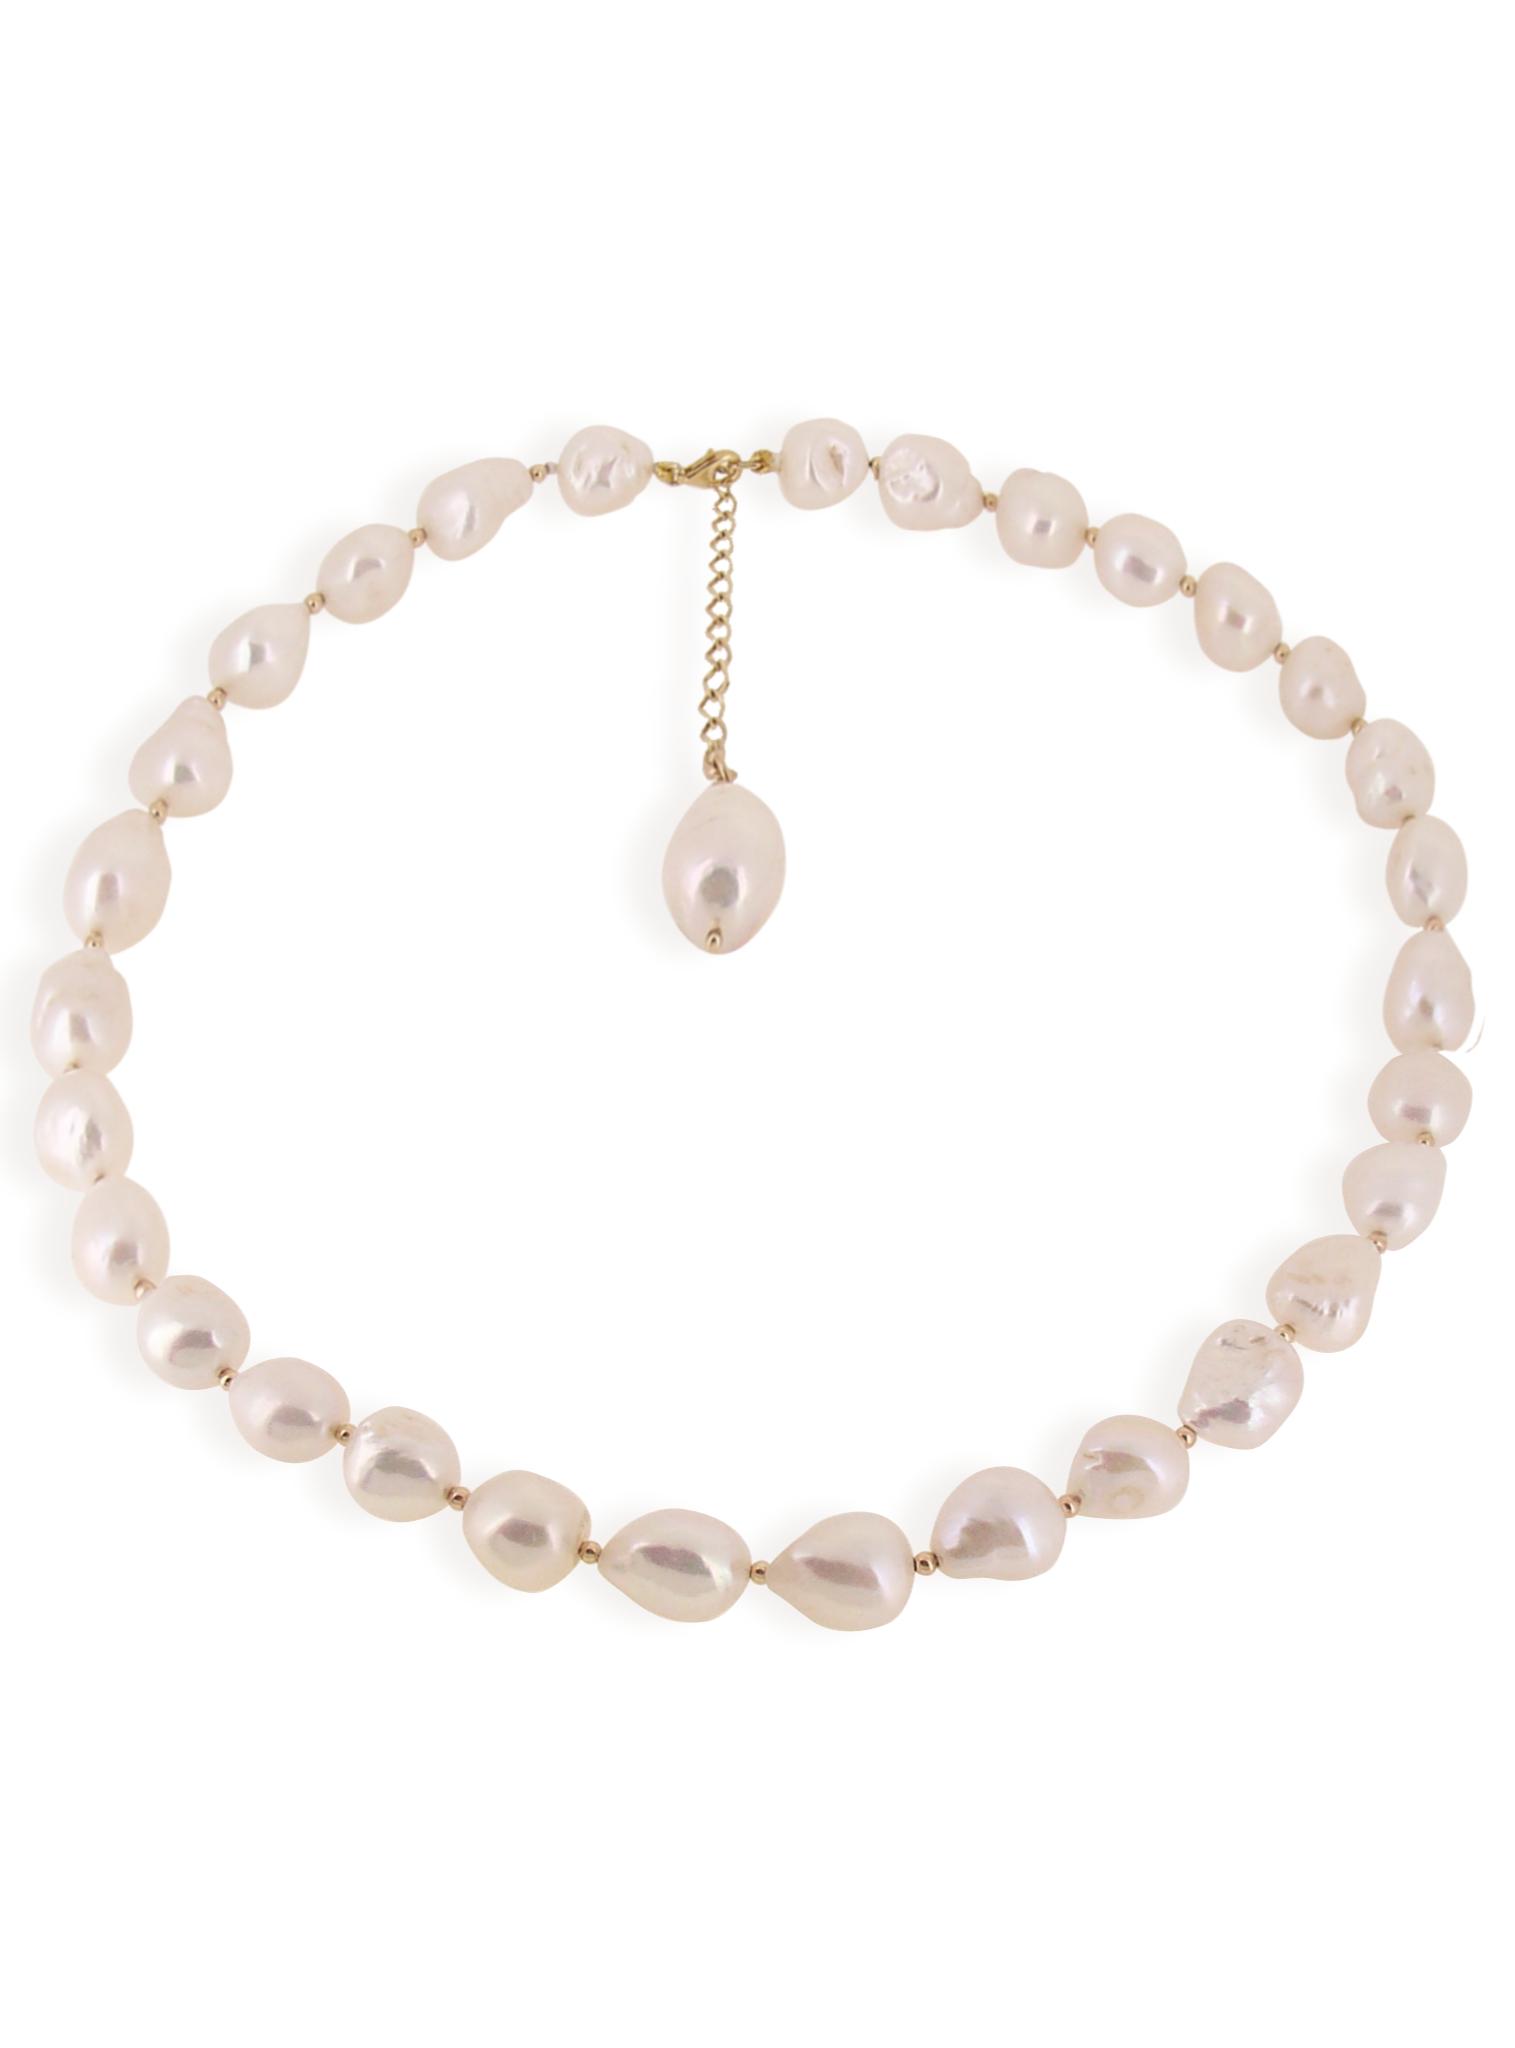 9ct Gold Graduated River Pearl Necklace - Varied In Natural Colours!